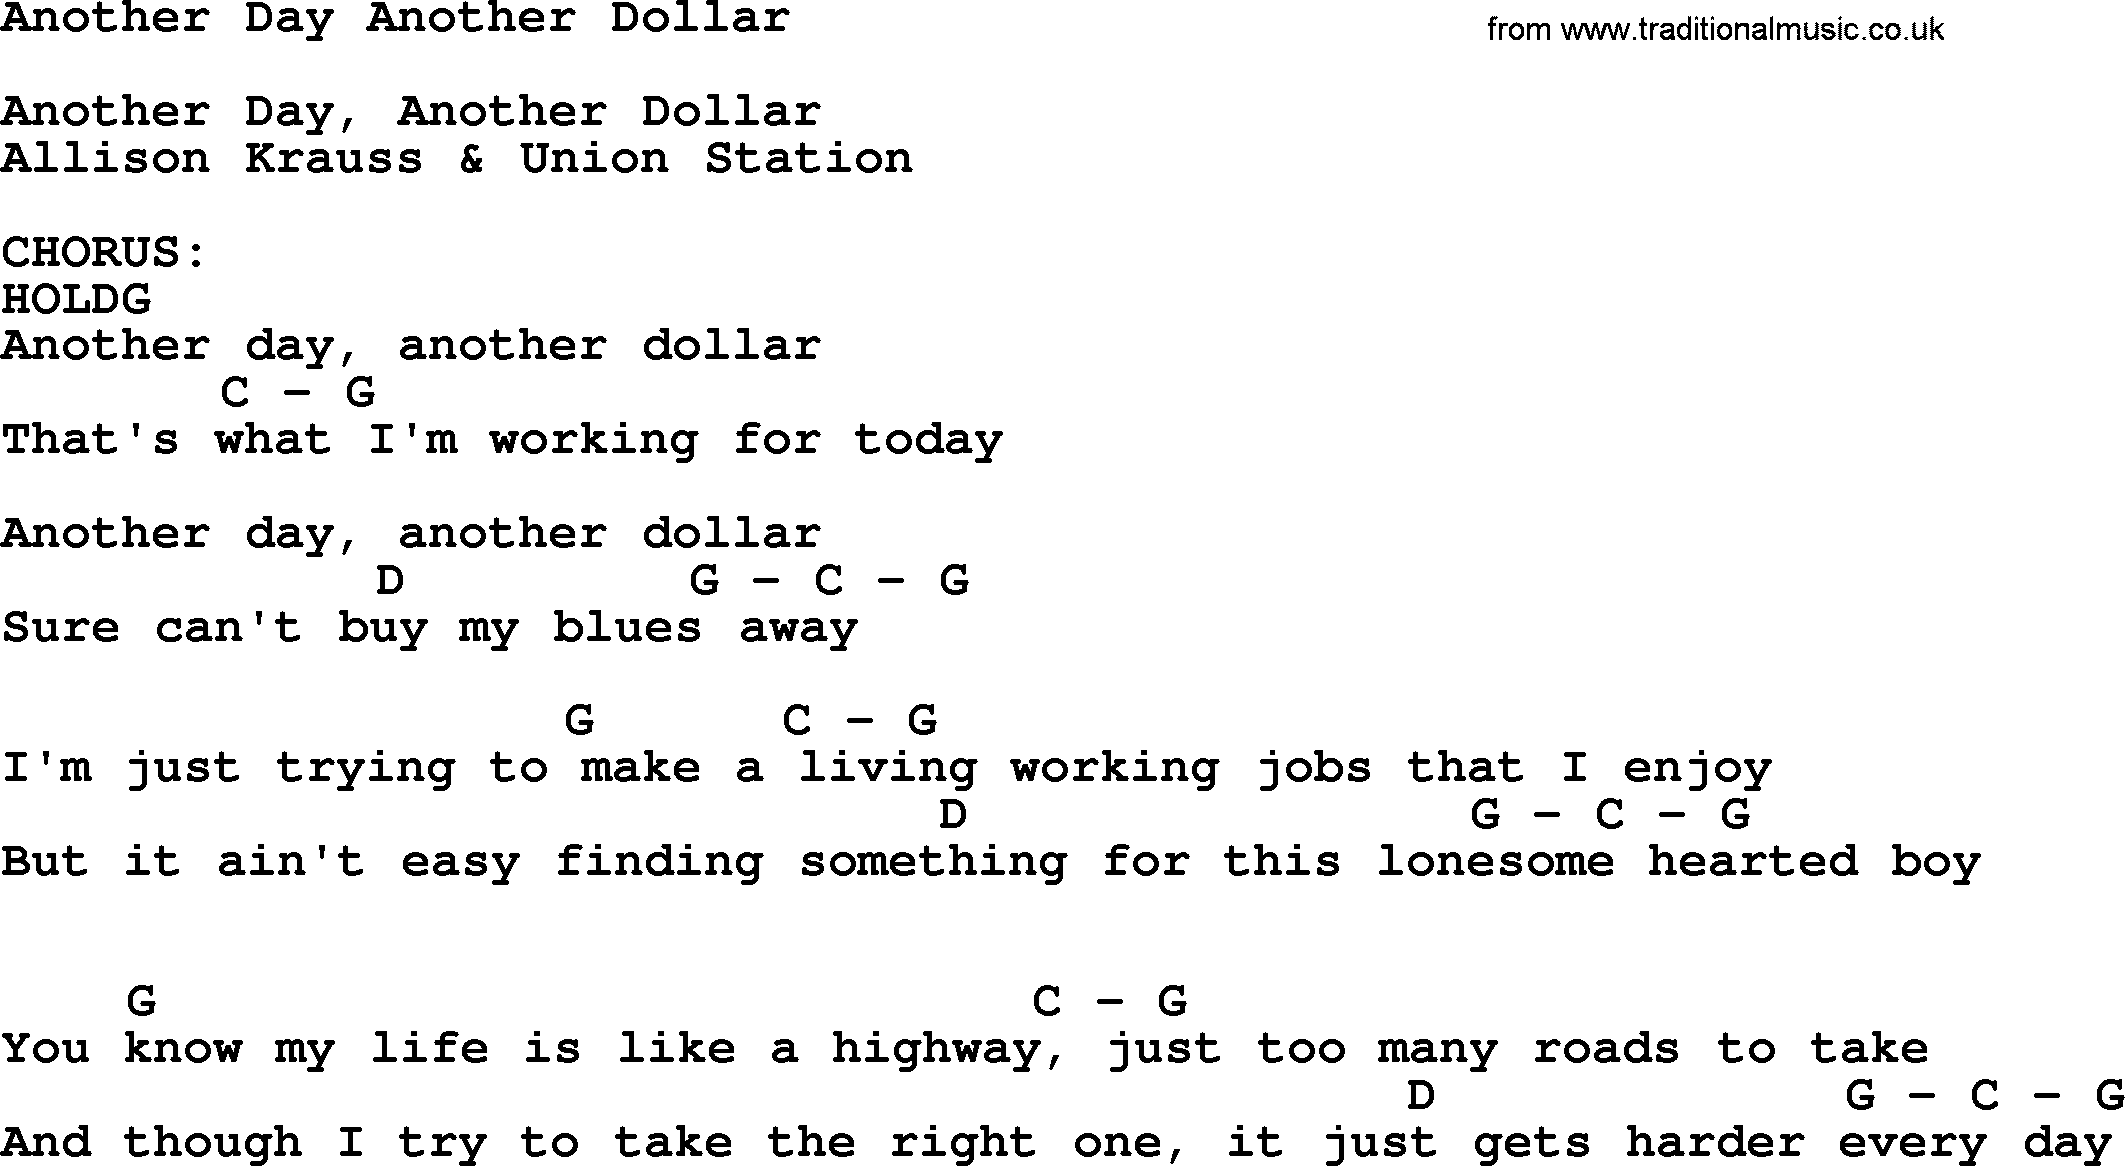 Bluegrass song: Another Day Another Dollar, lyrics and chords